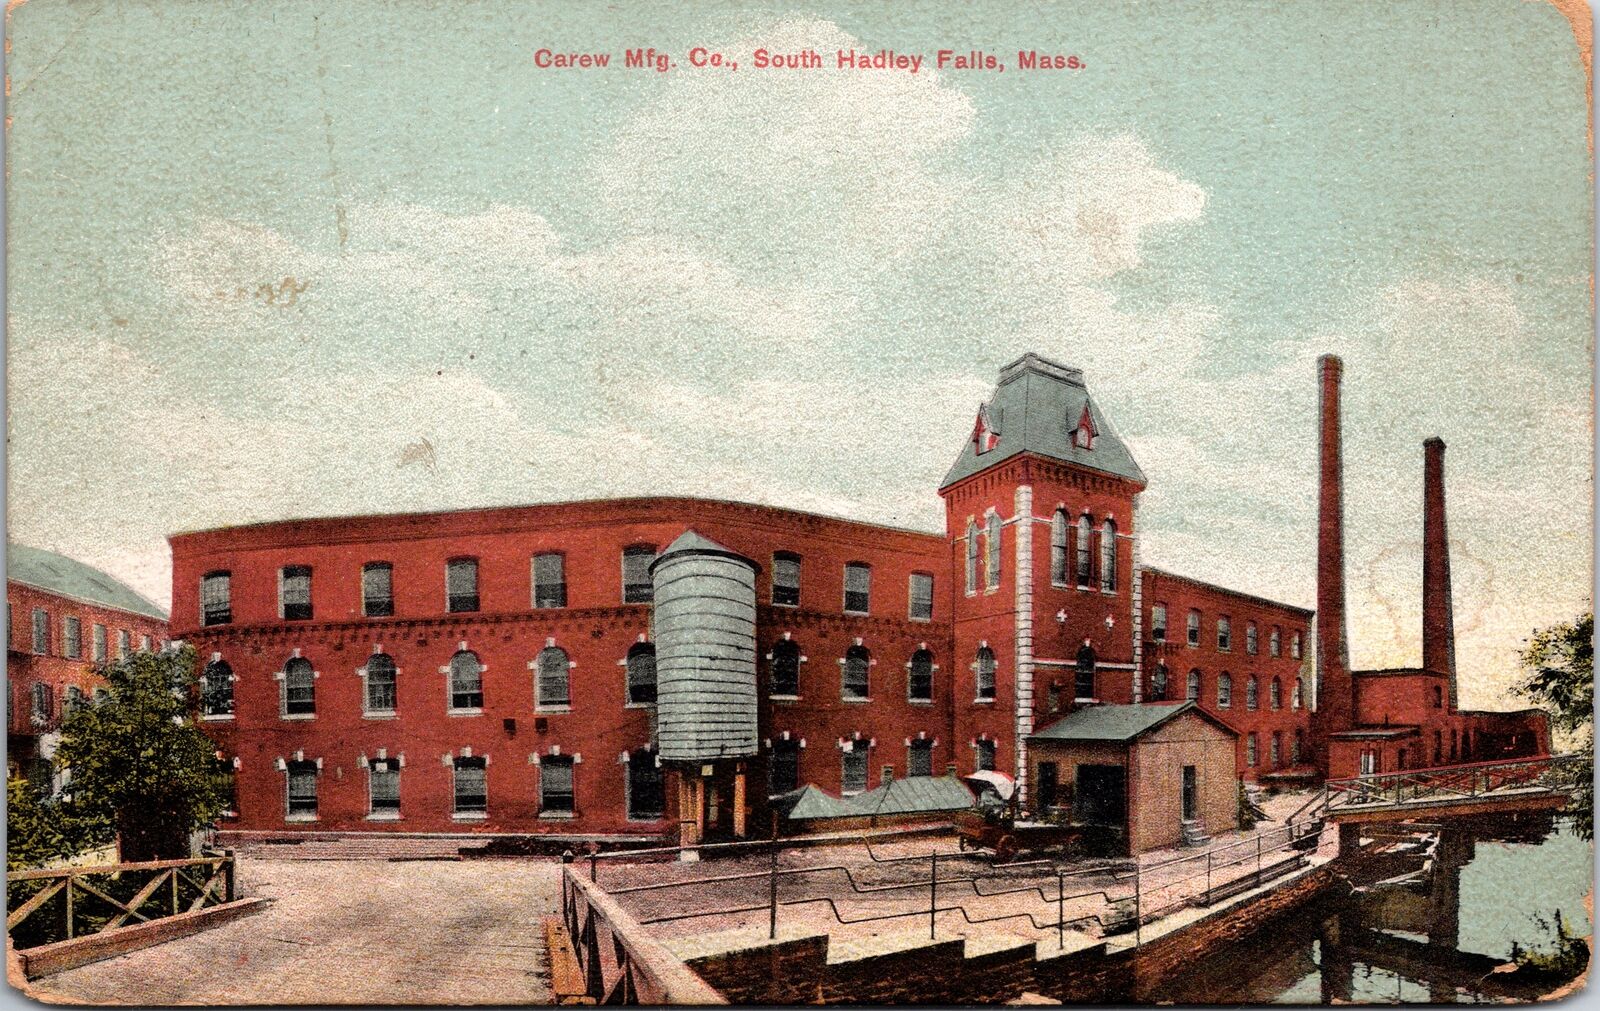 VINTAGE POSTCARD THE COROW MANUFACTURING Co. AT SOUTH HADLEY FALLS MASS (RARE)